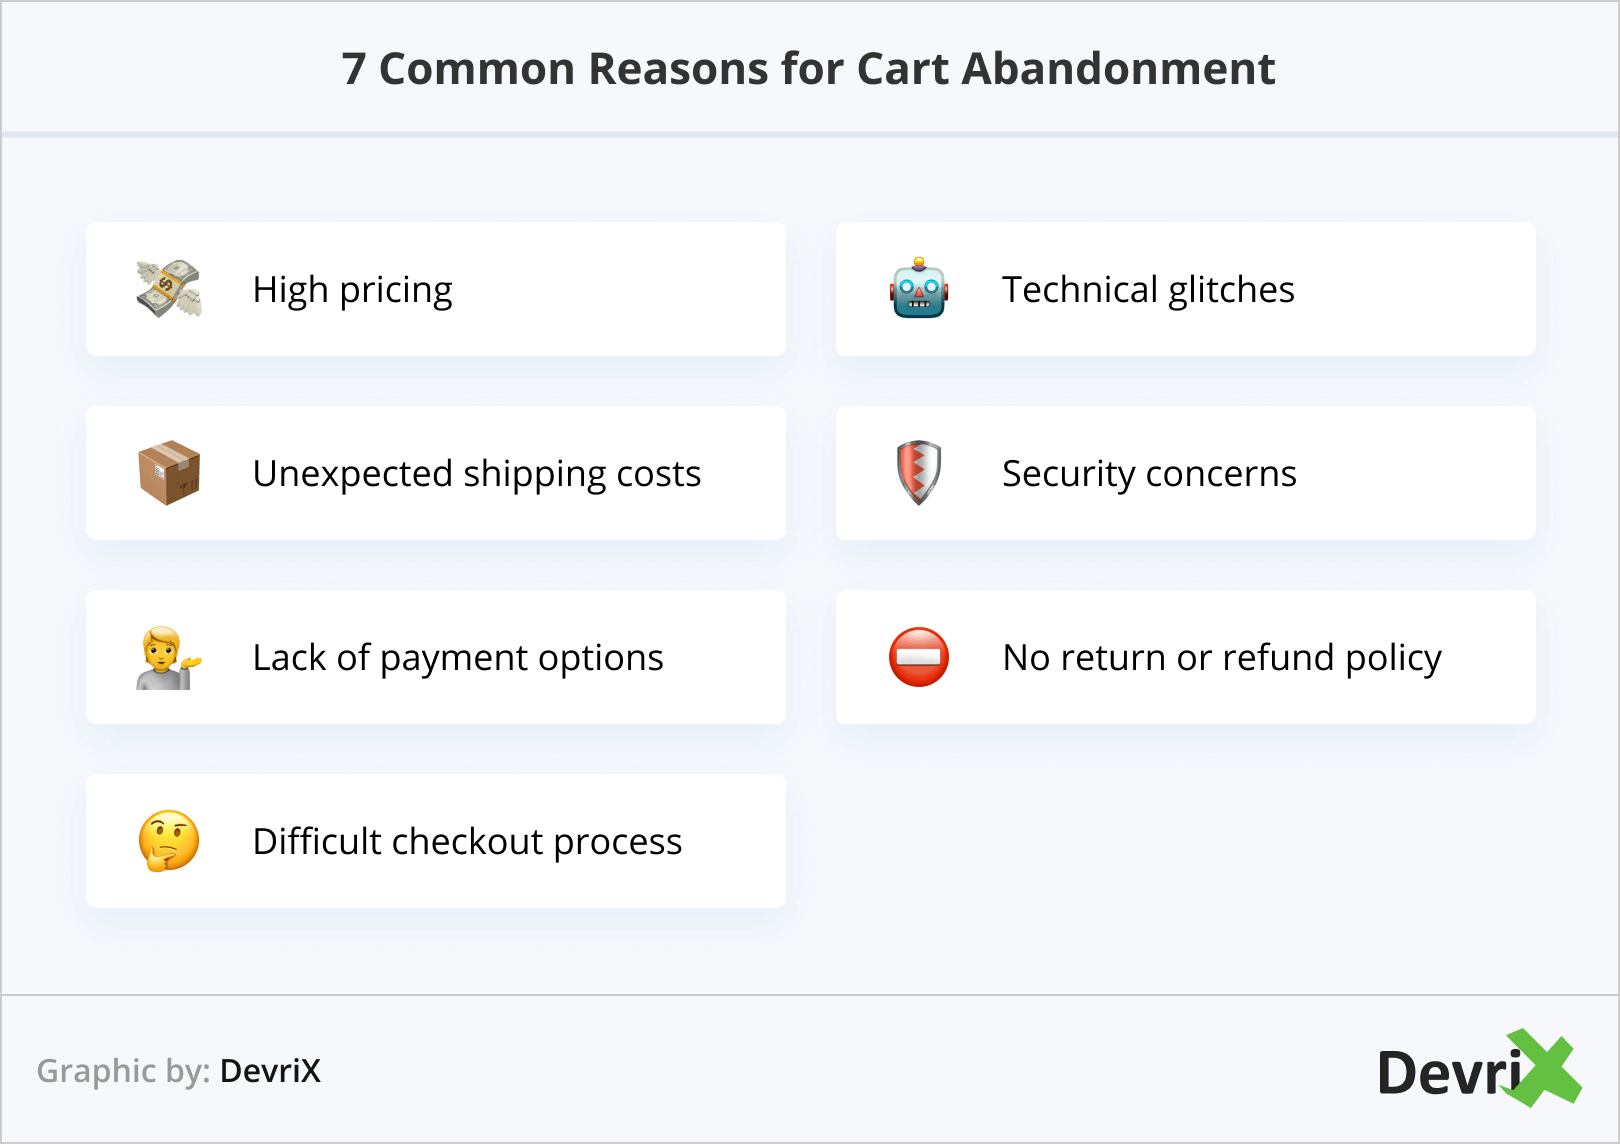 7 Common Reasons for Cart Abandonment